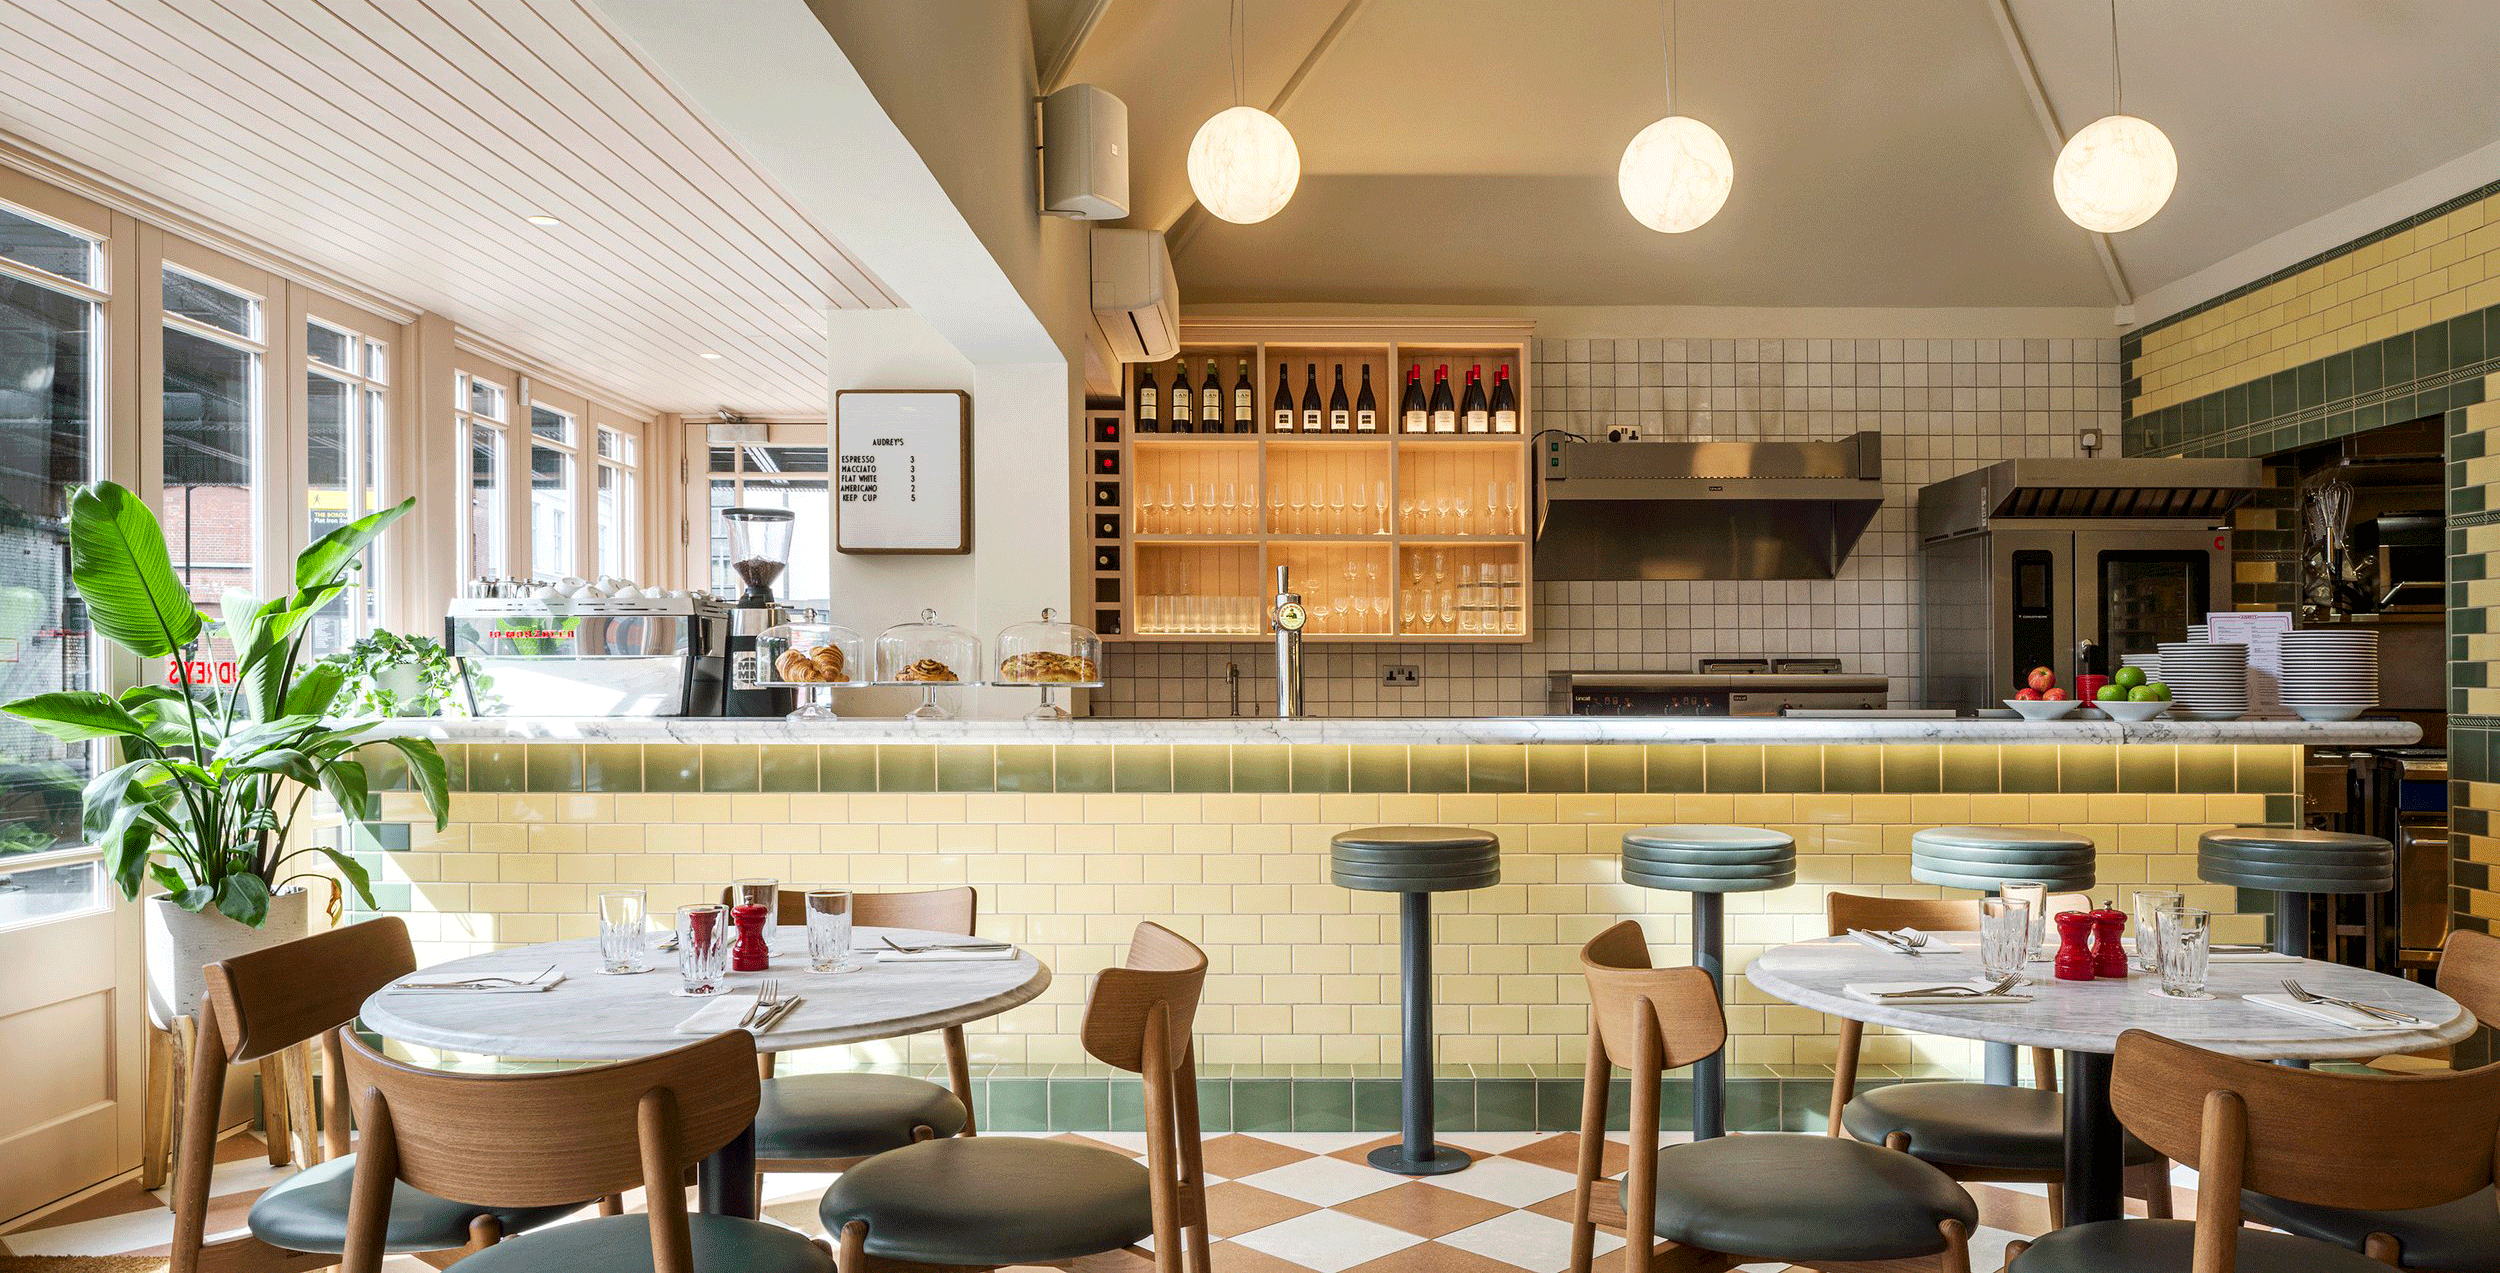 Audrey's Cafe & Bar Borough modern and retro restaurant designed by 3Stories Interior Design and branding creative agency London, featuring checkered floor, victorian inspired tiles, open kitchen and hanging lights, cosy and unpretencious interior